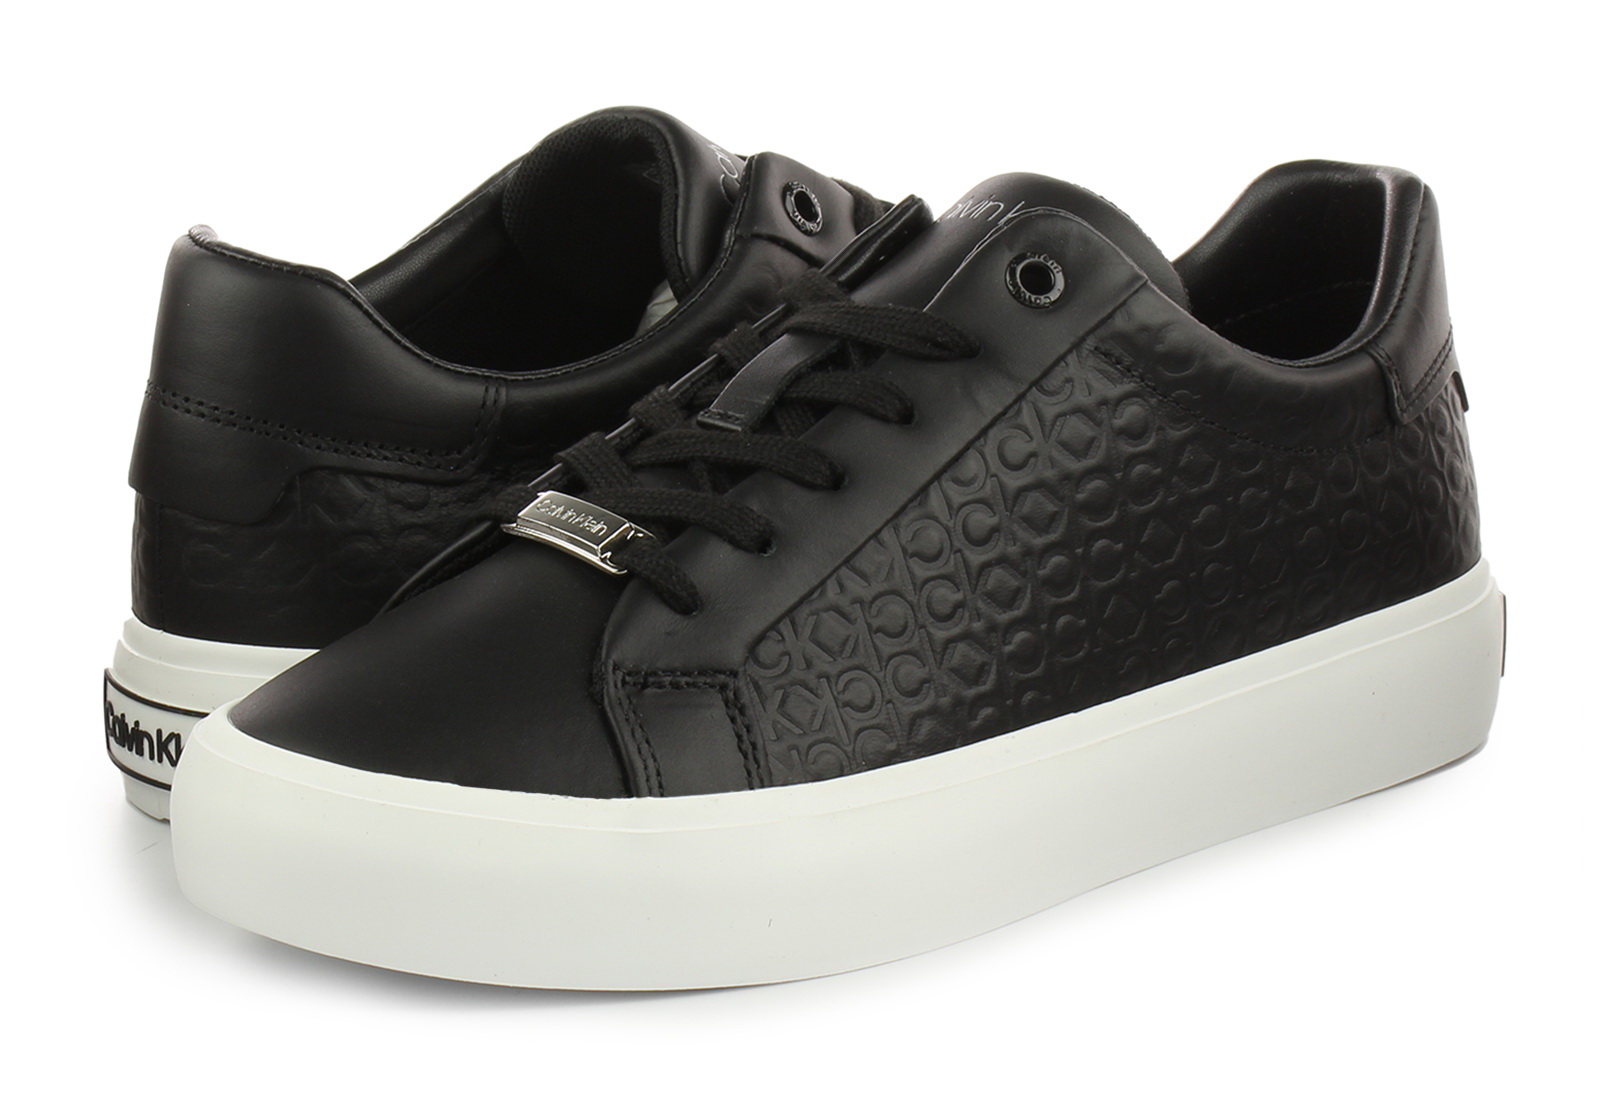 Calvin Klein Trainers - Violet 3a - HW00541-BAX - Online shop for sneakers,  shoes and boots